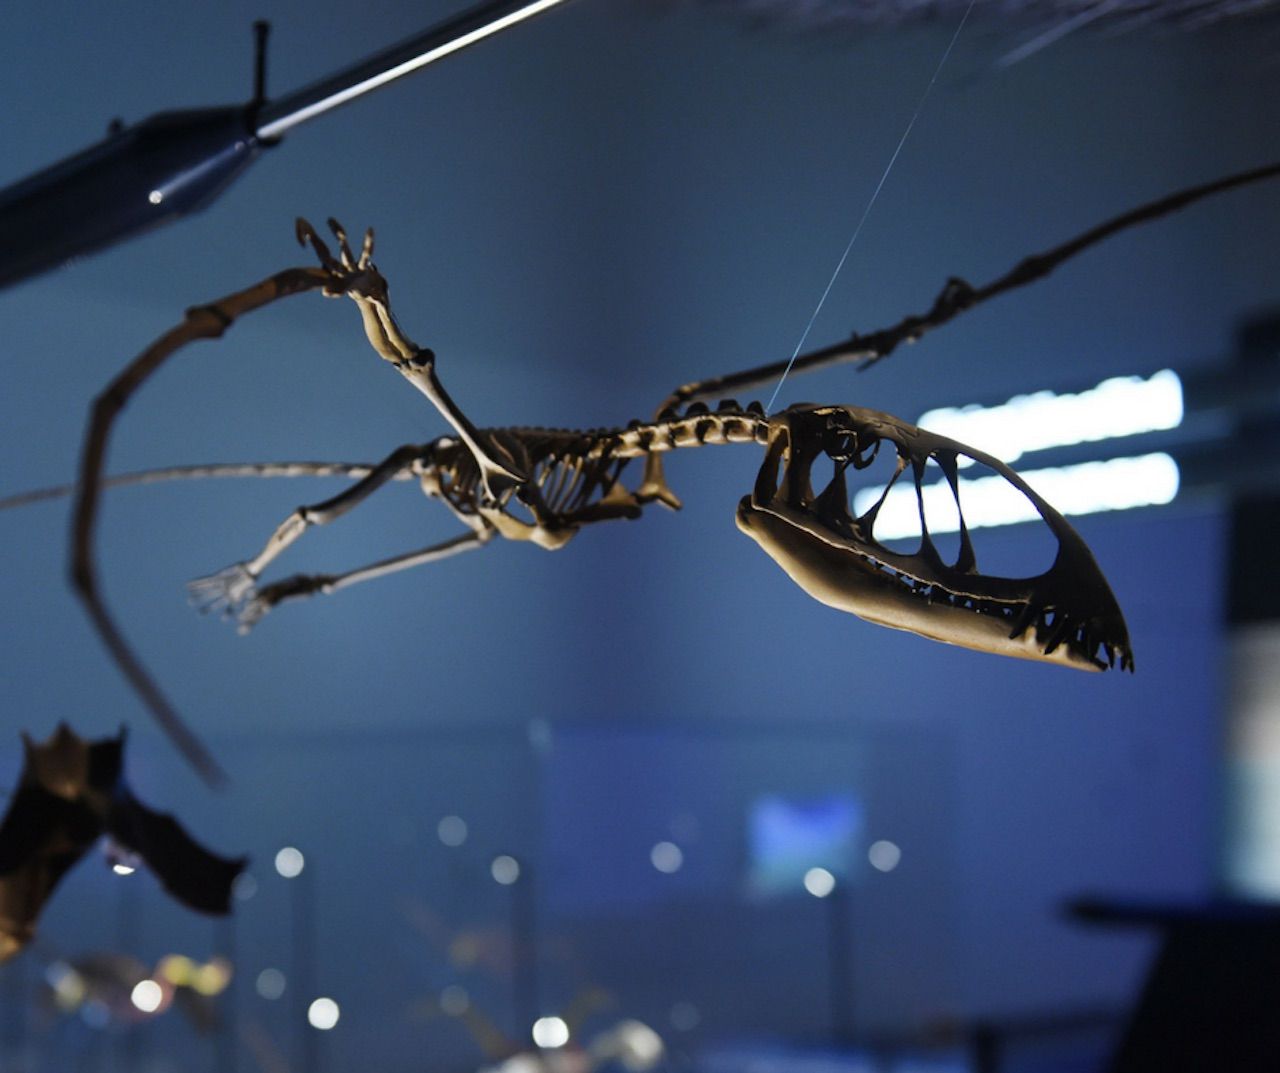 Prehistoric fossil at Frost Museum of Science in Miami, Florida